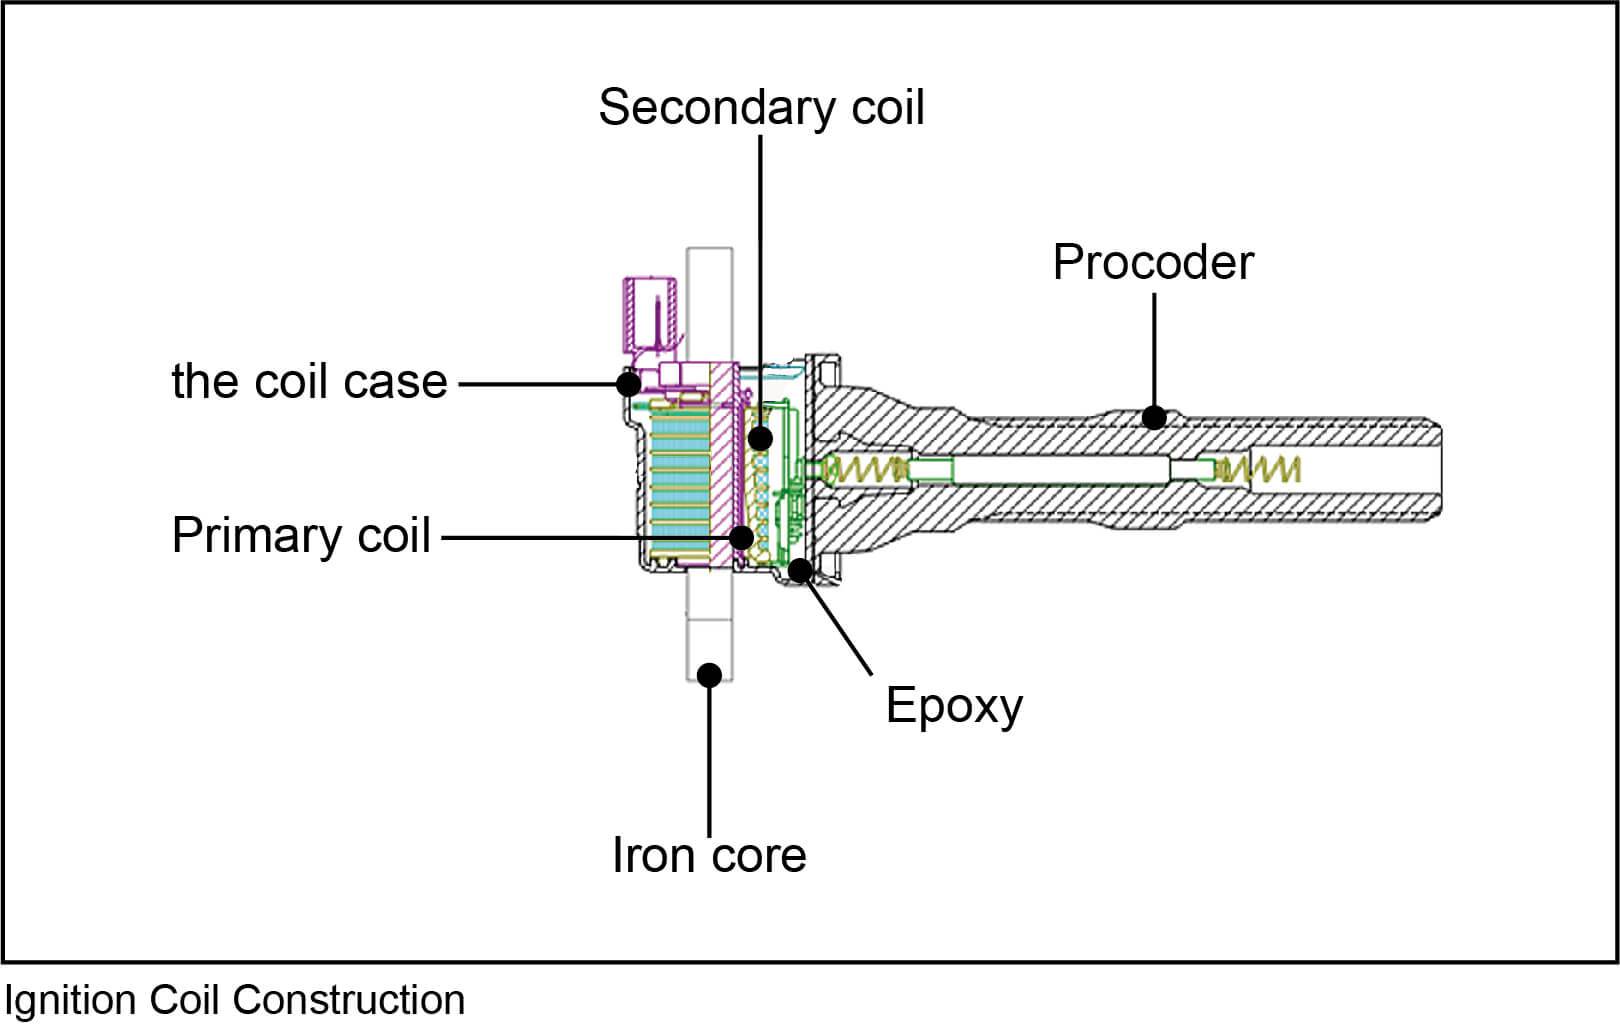 Ignition Coil Construction